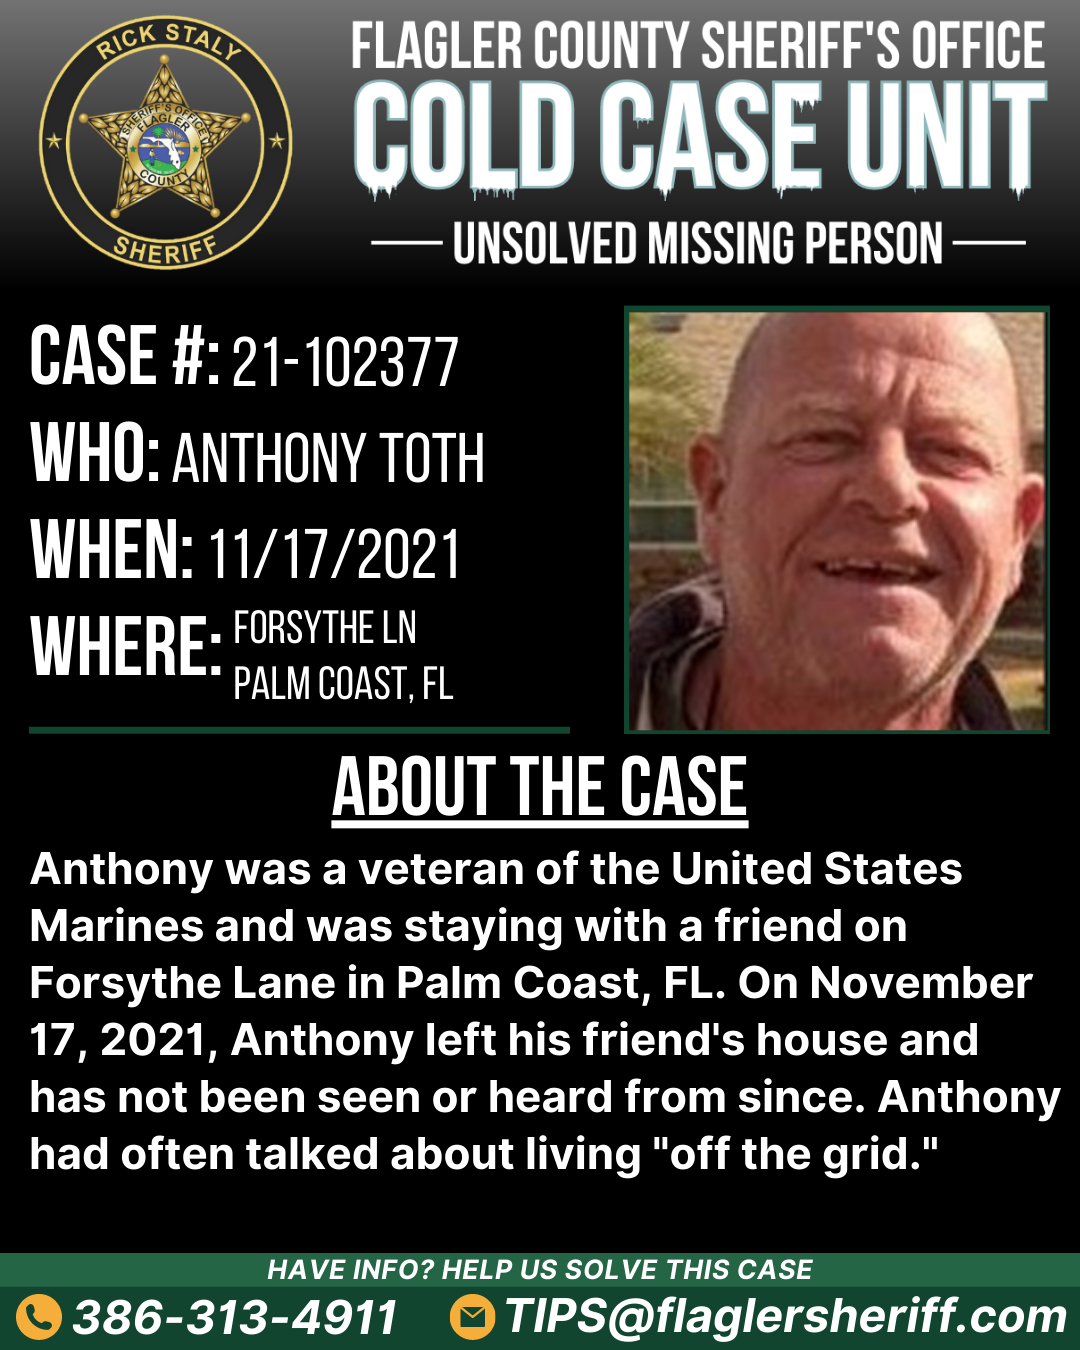 Case #21-102377. Who: Anthony Toth. When: 11/17/2021. Where: Forsythe Lane (Palm Coast, FL). About the case: Anthony was a veteran of the United States Marines and was staying with a friend on Forsythe Lane in Palm Coast, FL. On November 17, 2021, Anthony left his friend's house and has not been seen or heard from since. Anthony had often talked about living 